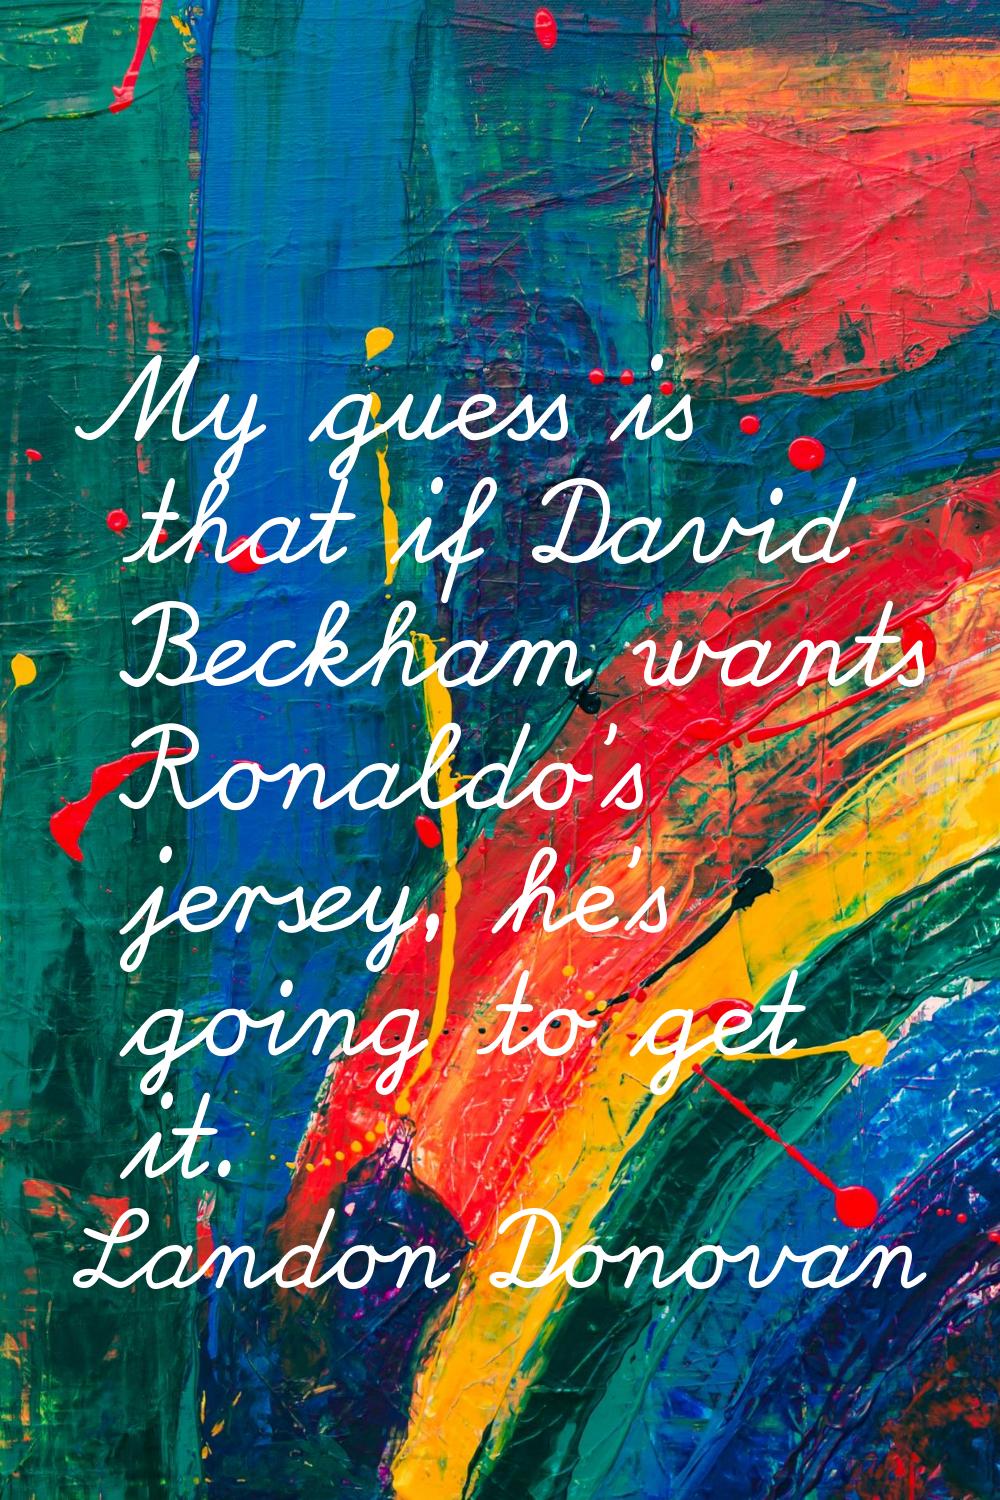 My guess is that if David Beckham wants Ronaldo's jersey, he's going to get it.